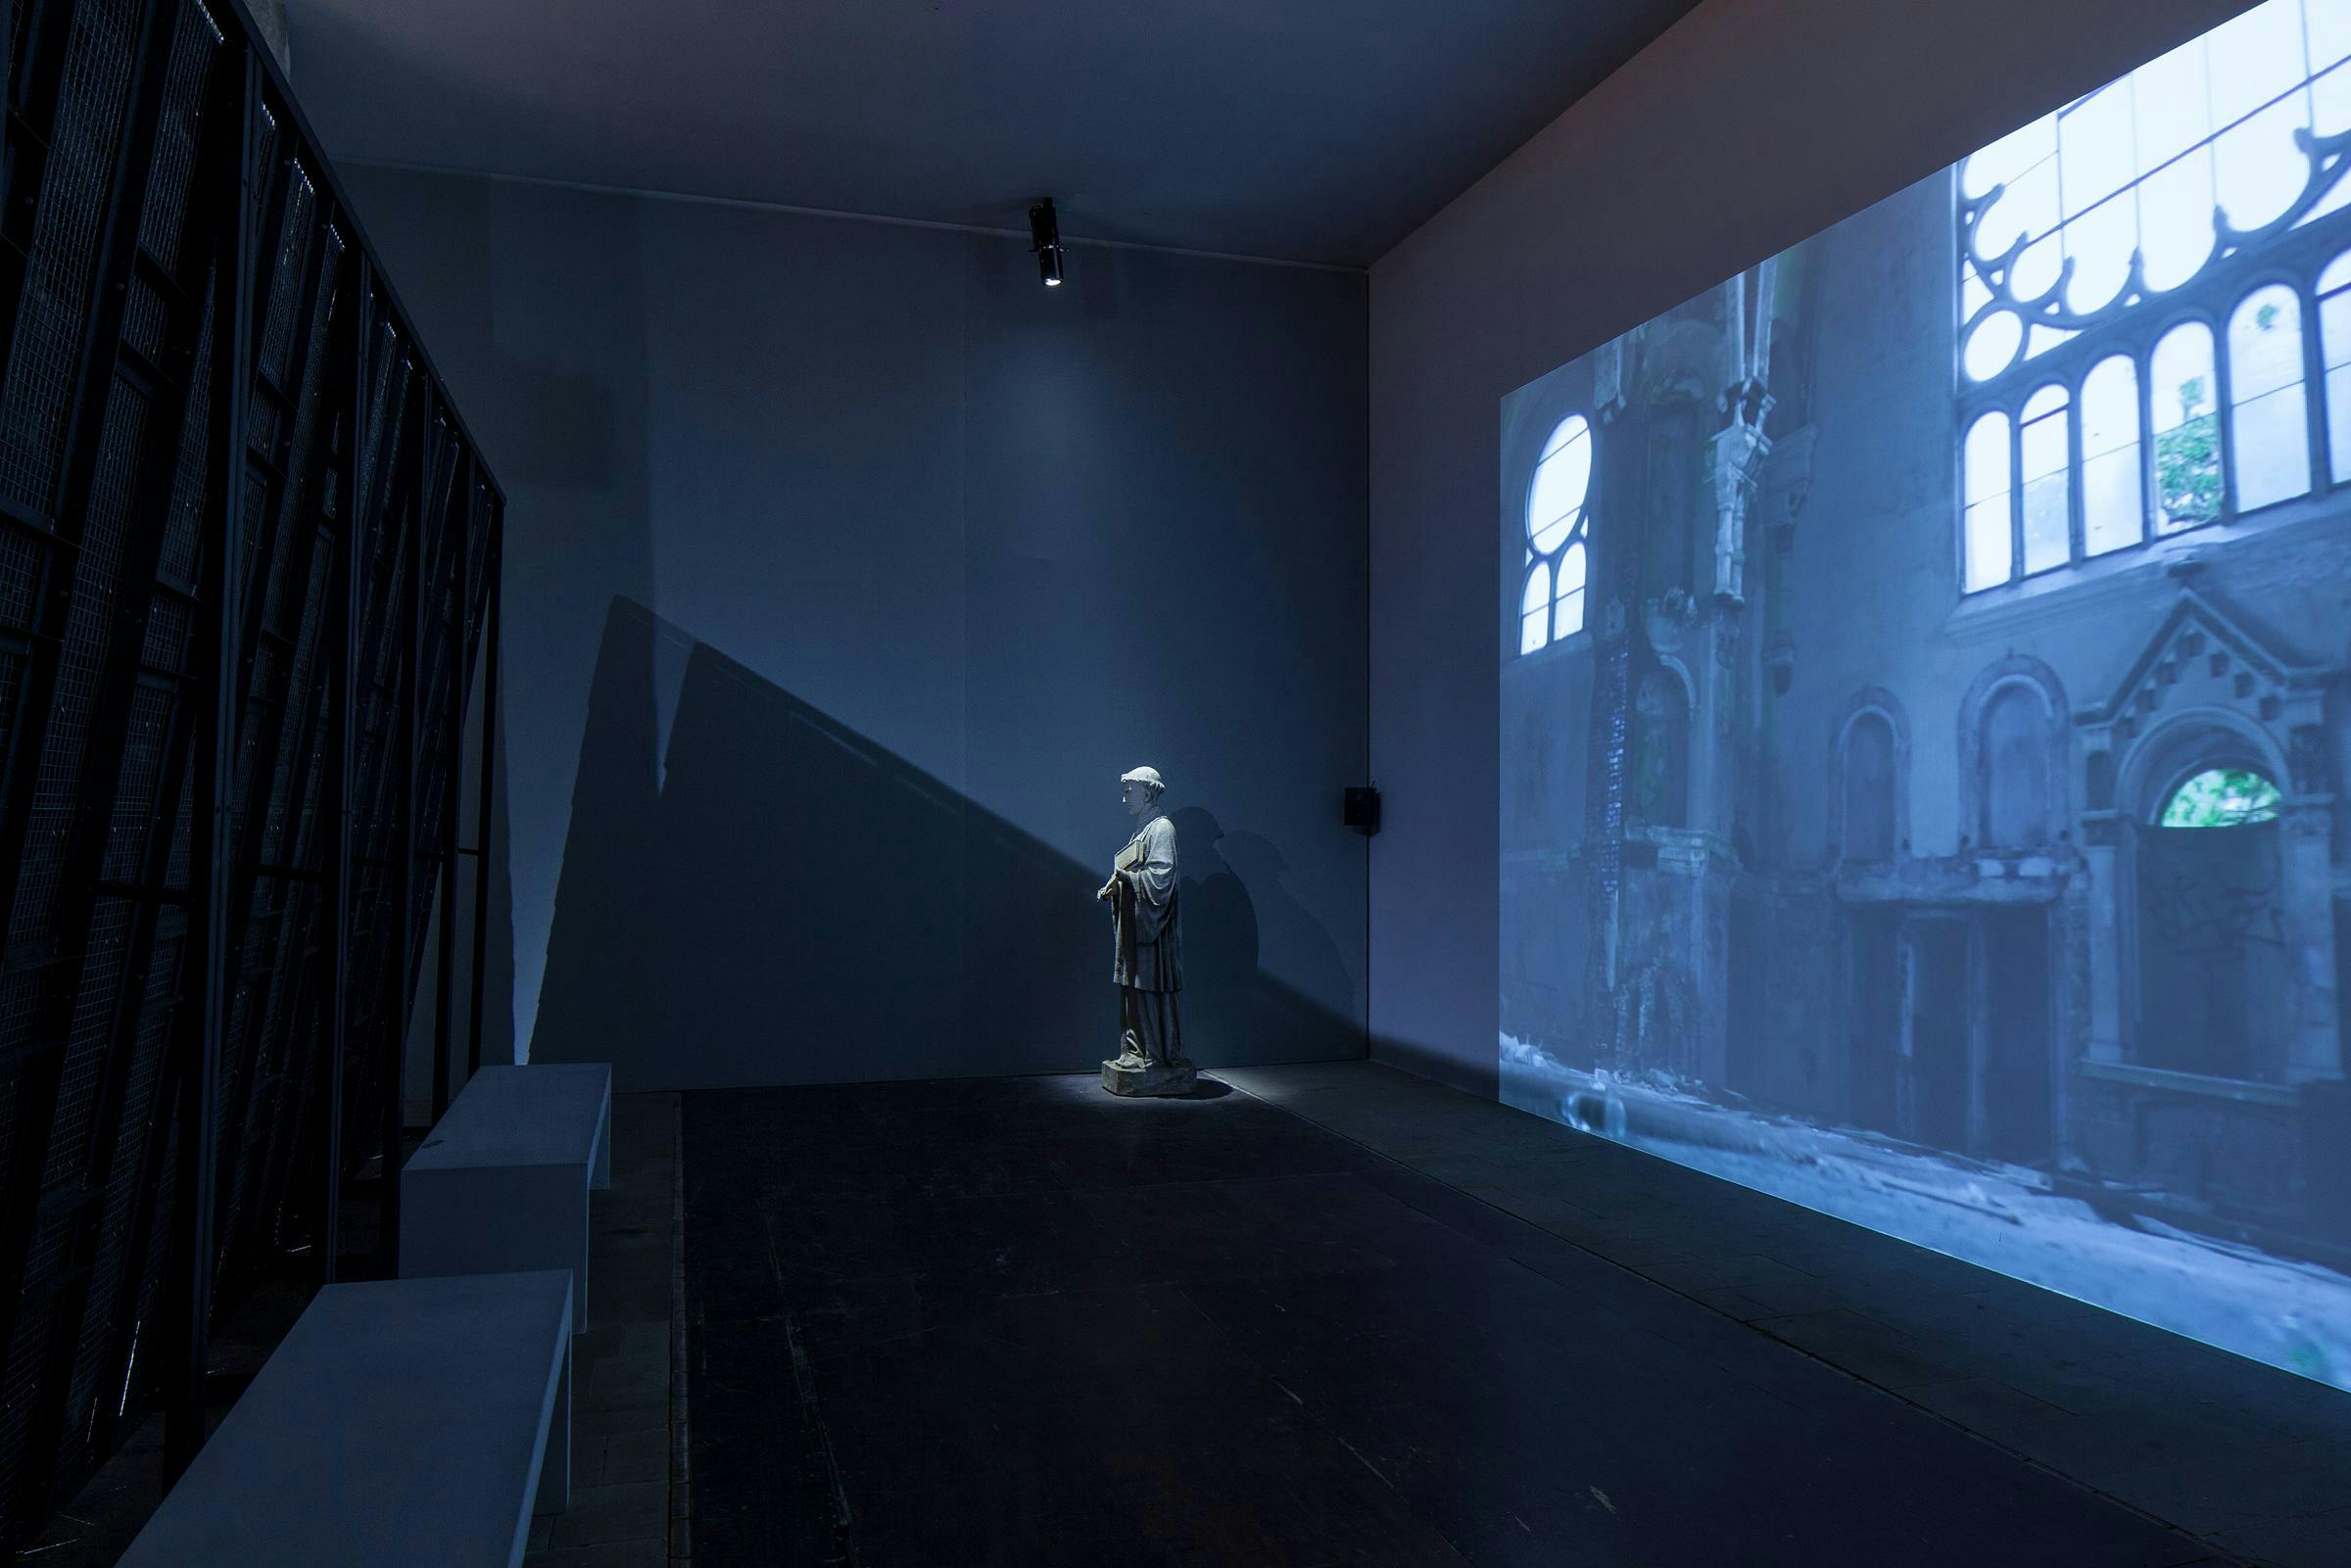 Installation view, Theaster Gates, Gone are the Days of Shelter and Martyr from 56th Venice Viennale, All the World's Futures, 9 May - 22 November 2015, Venice, Italy. Here we can see the beam of light the projector throws onto the wall